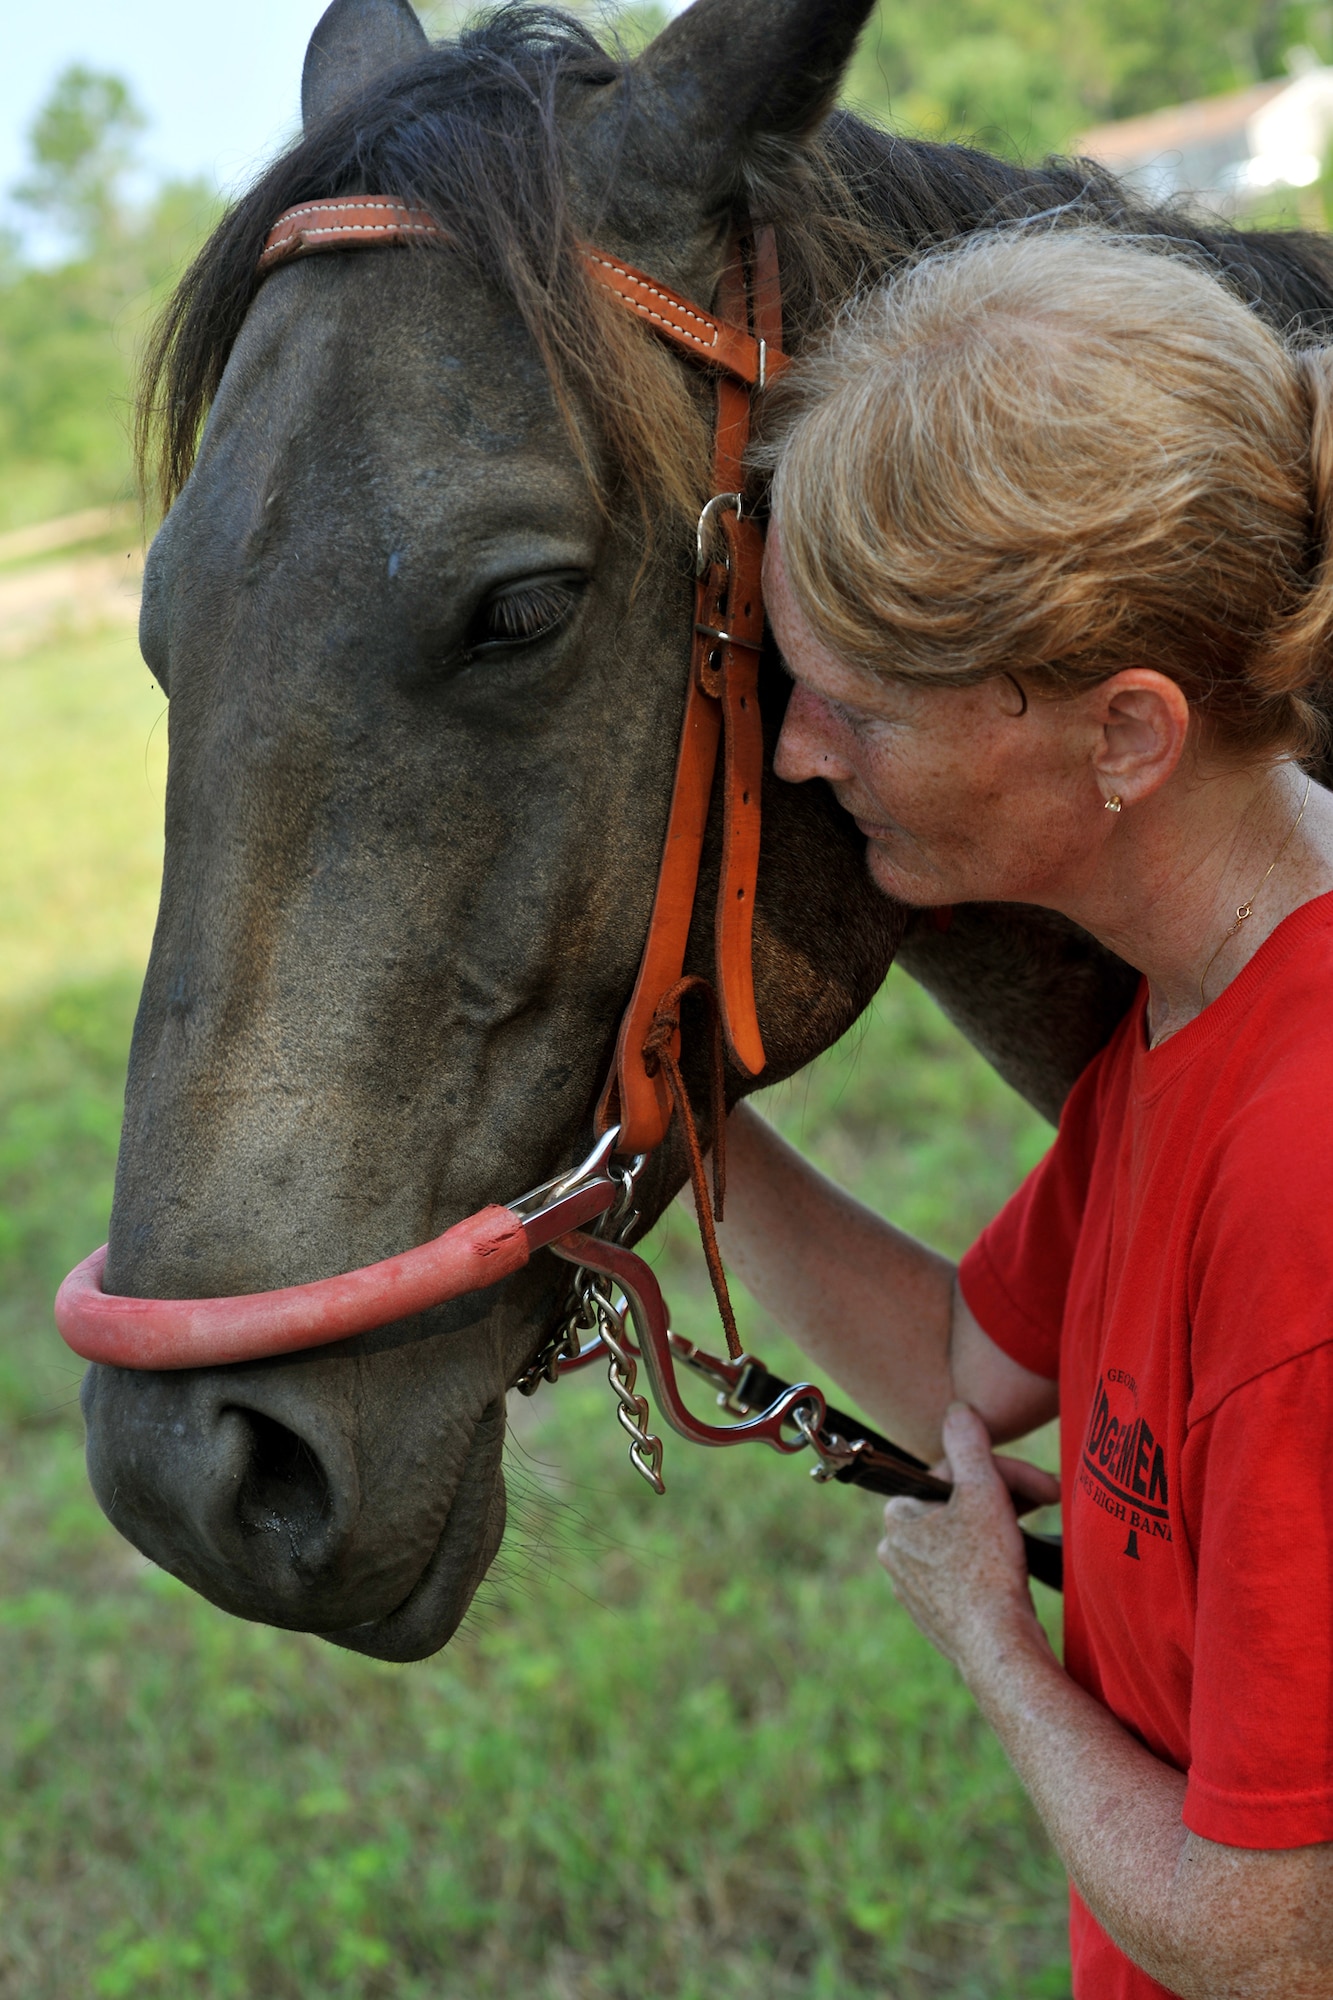 Maj. Laurie Abney pulls the face of Blue, a riding horse, into hers during a moment of relaxation at the Hopes and Dreams Riding Facility July 31, 2010, in Quitman, Ga. The Hopes and Dreams Riding Facility is a therapeutic horseback riding program and is an activity which has been proven to help relieve symptoms of brain trauma and stress-related disorders in many people, including combat veterans. Major Abney is the 23rd Medical Group education and training flight commander. (U.S. Air Force photo/Airman 1st Class Joshua Green)